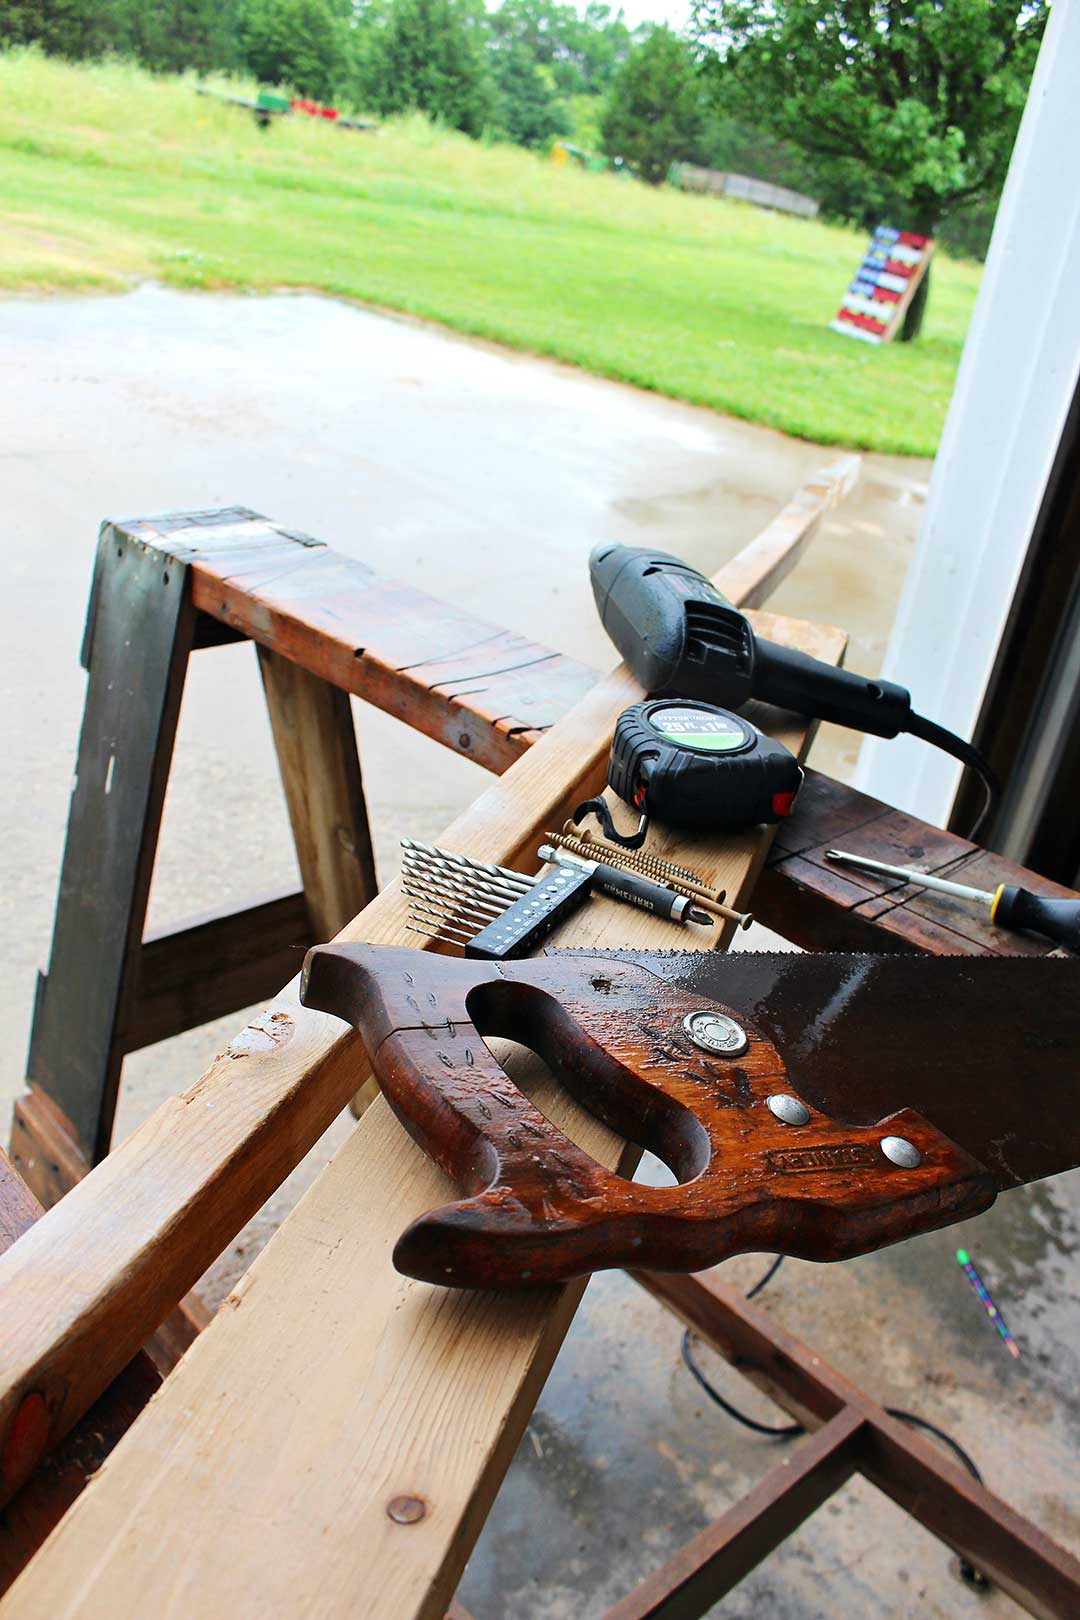 Woodworking supplies resting on a sawhorse.